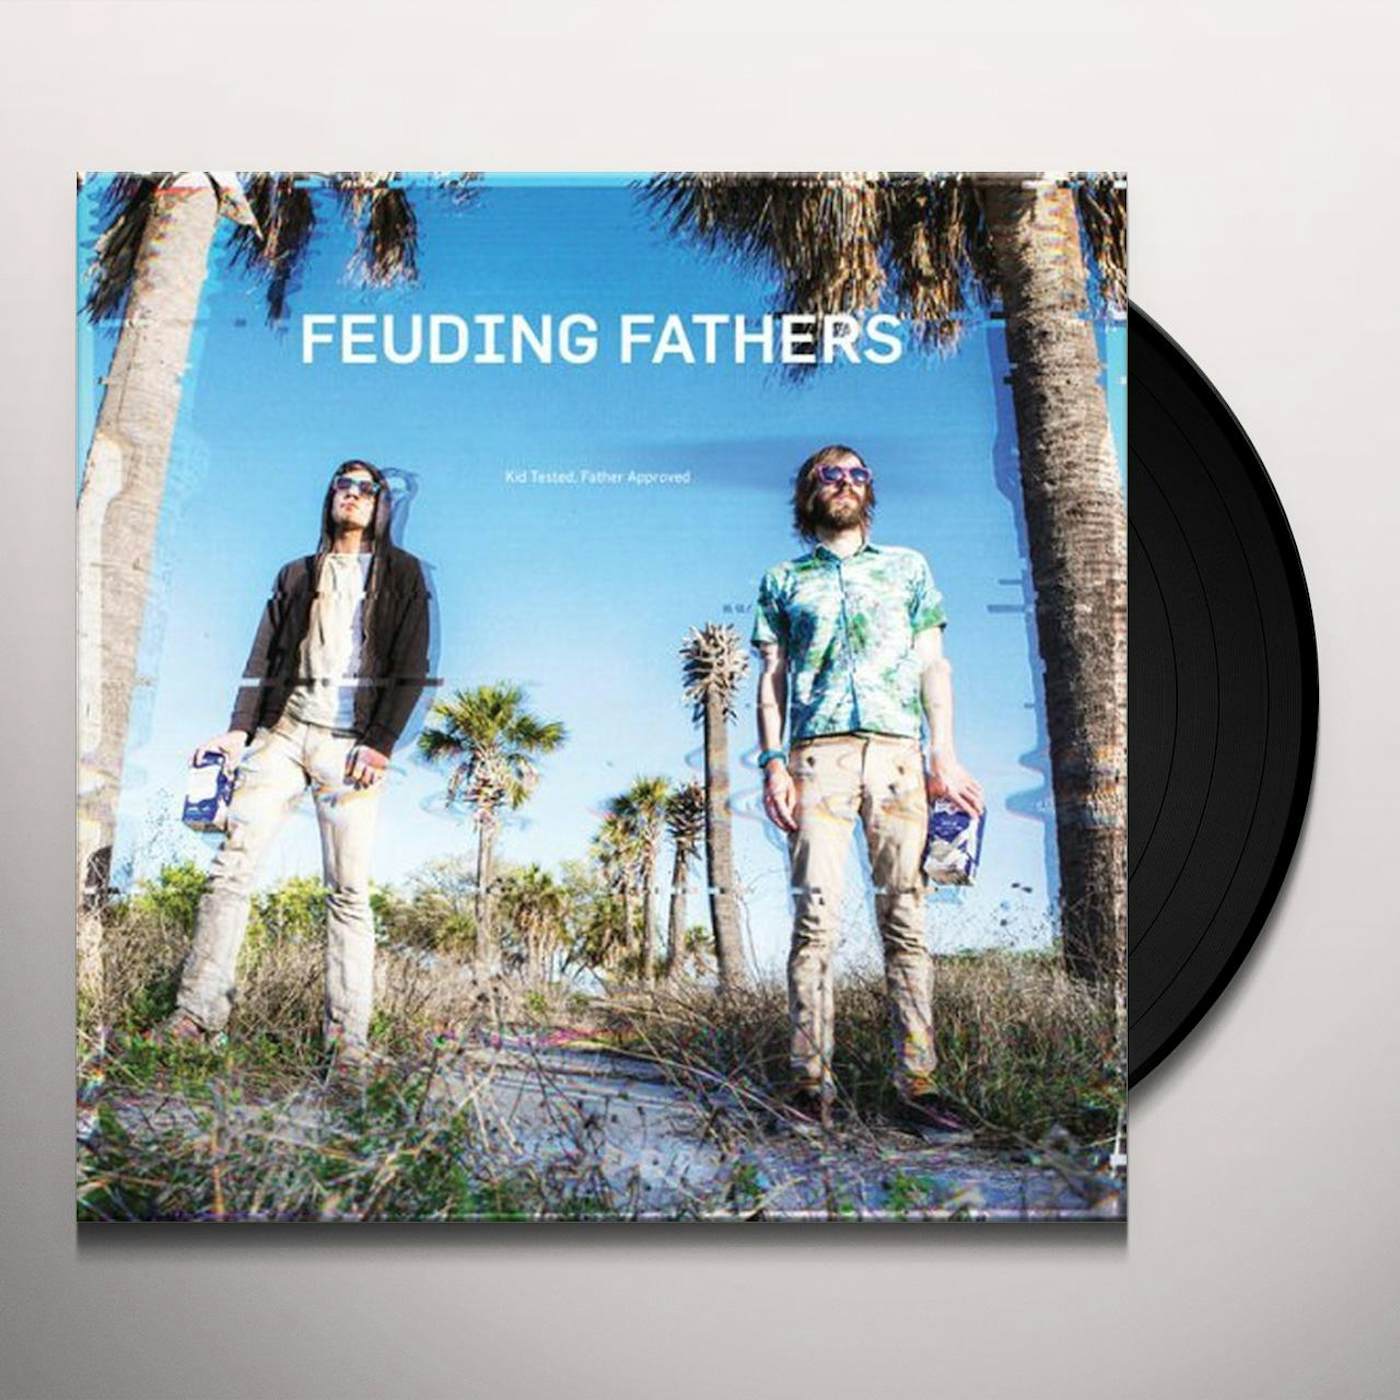 Feuding Fathers Kid Tested Father Approved Vinyl Record